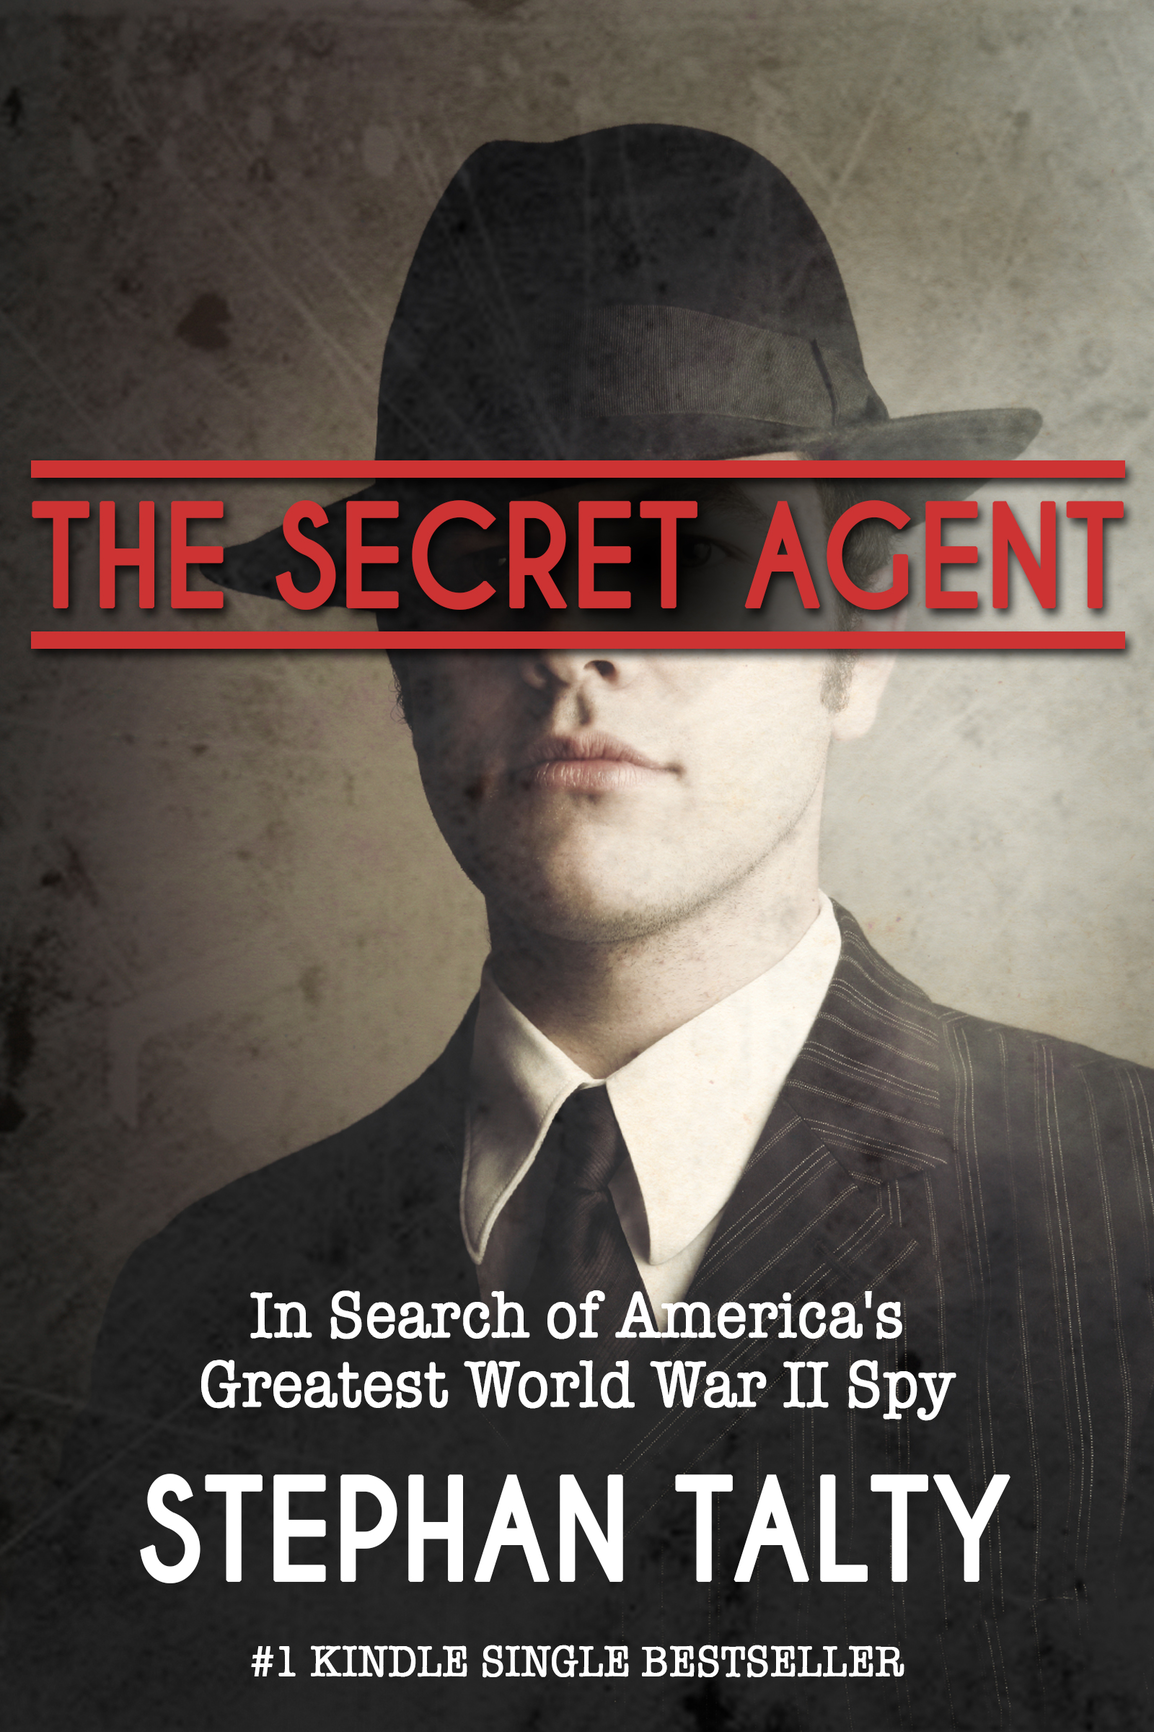 The Secret Agent (2013) by Stephan Talty